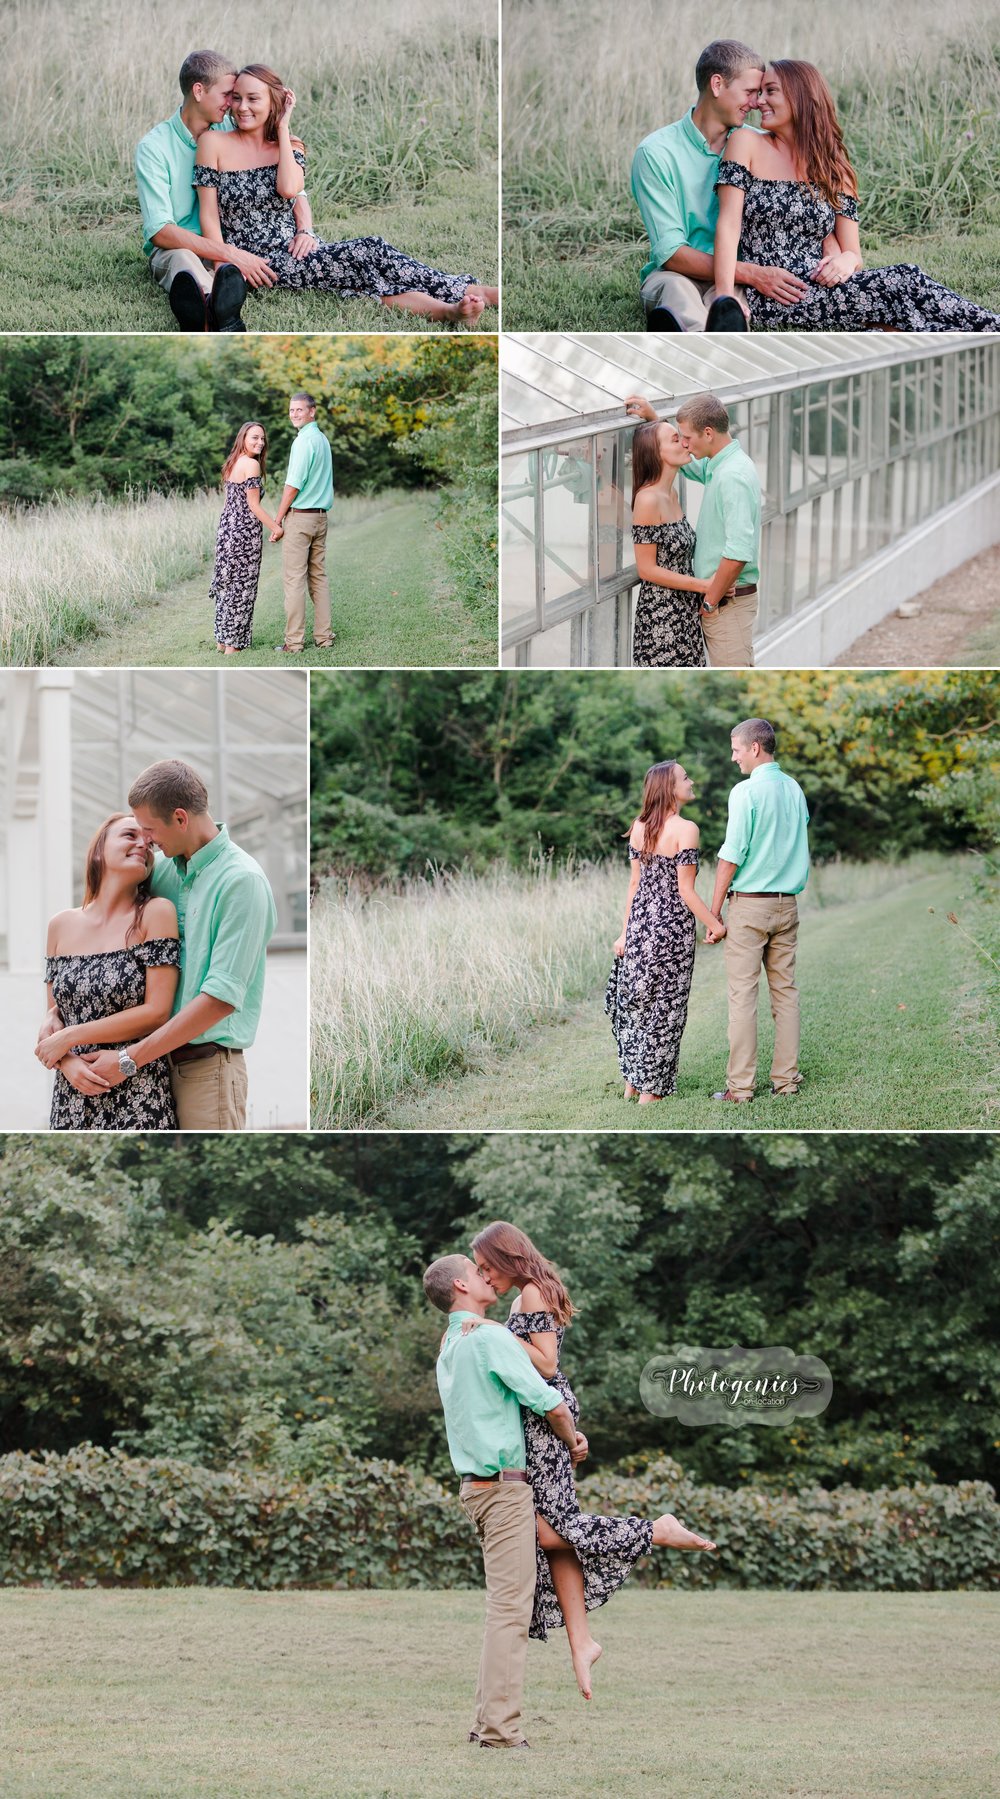  engagement_session_farm_outdoors_photography_couple_wedding_new_haven_mo_st_louis_photographer 3 